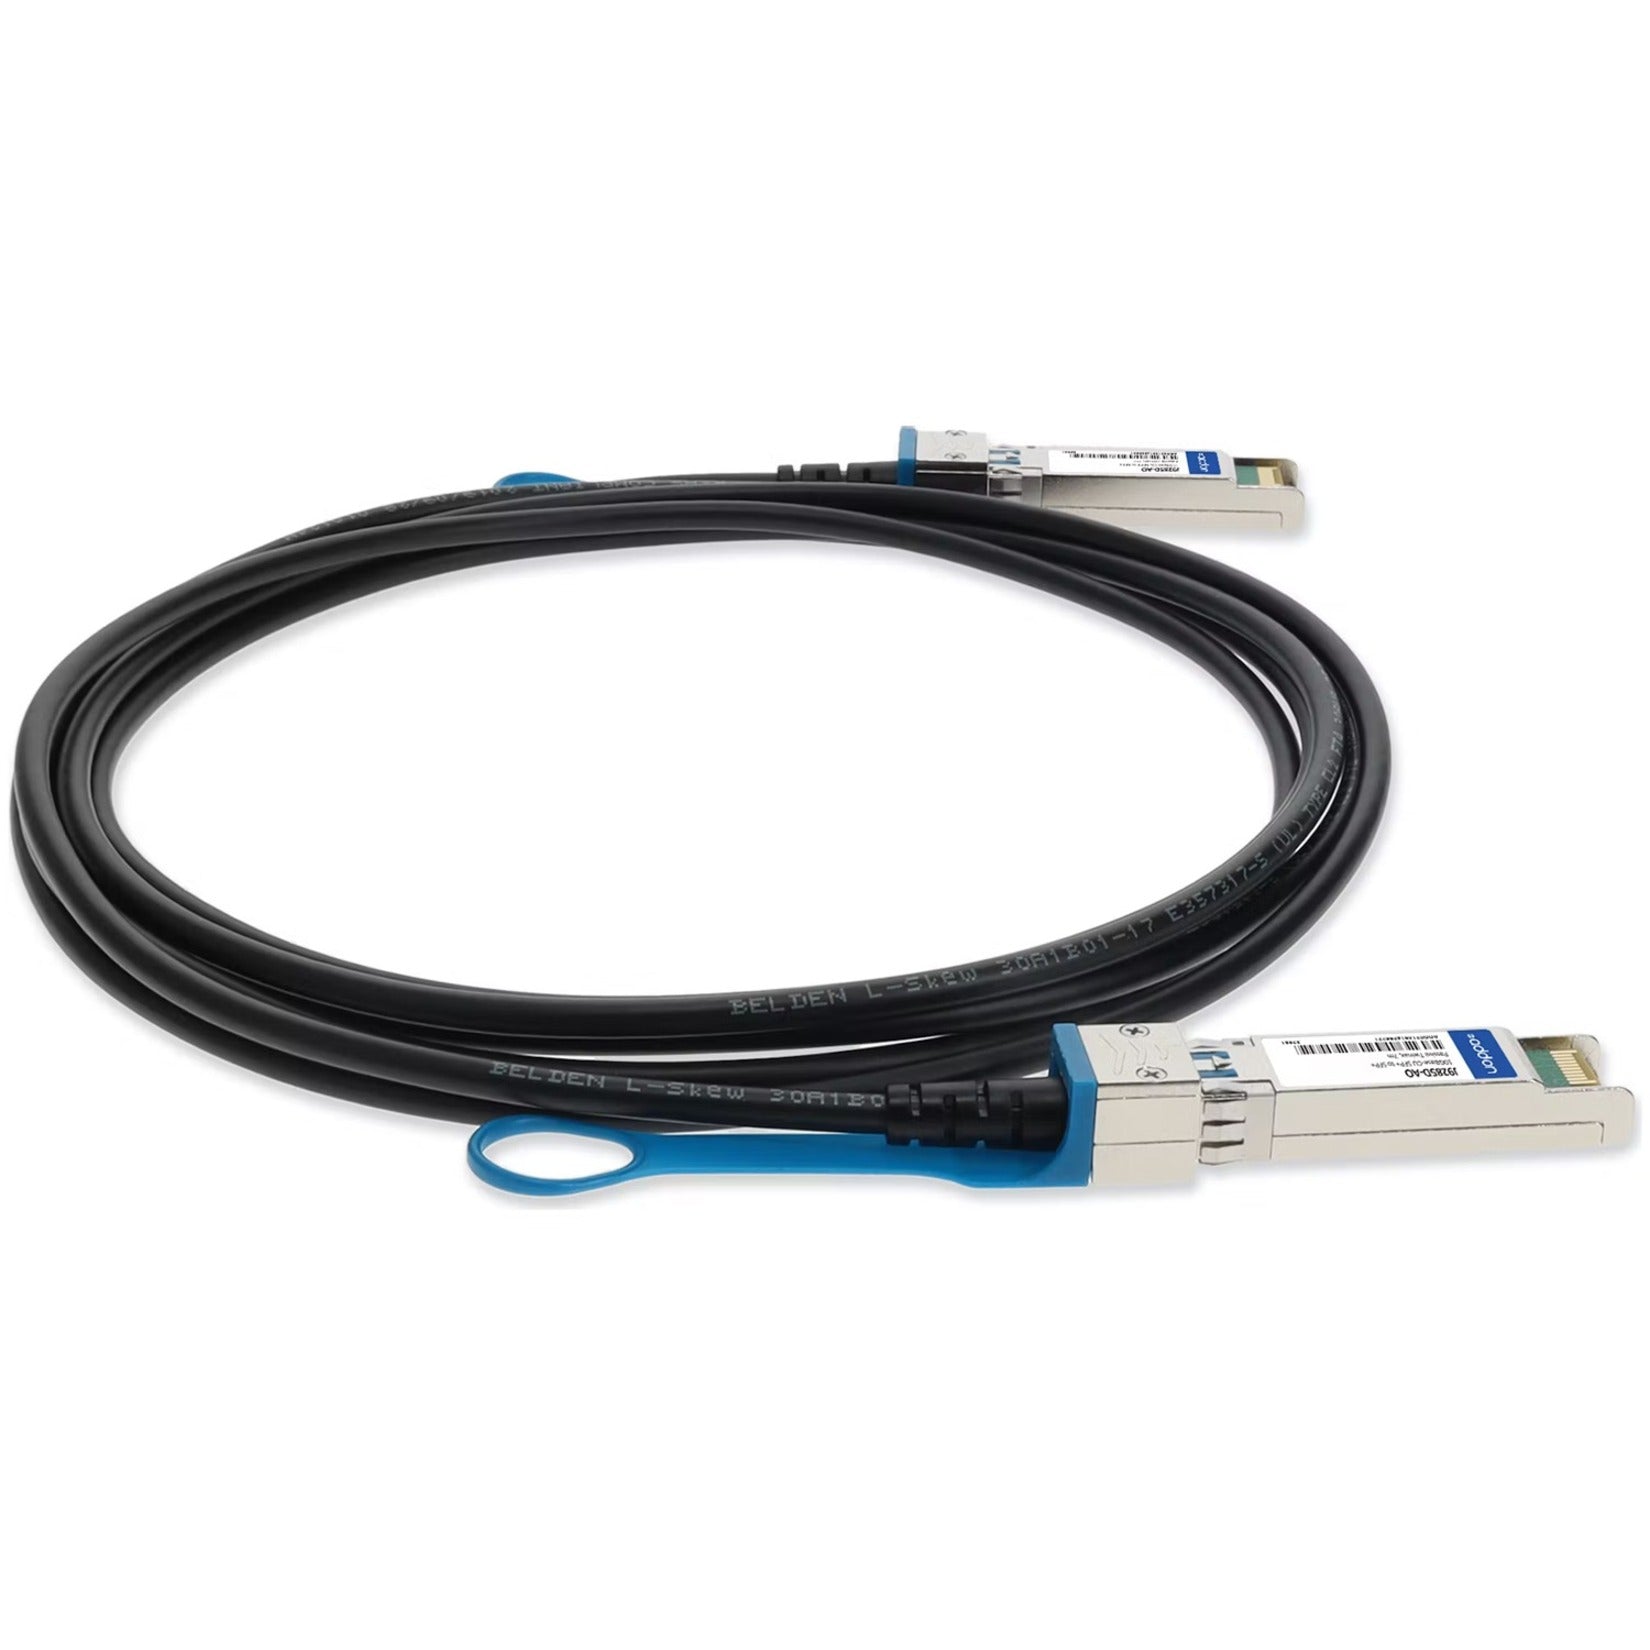 AddOn J9285D-AO Twinaxial Network Cable, 10 Gbit/s, 22.97 ft